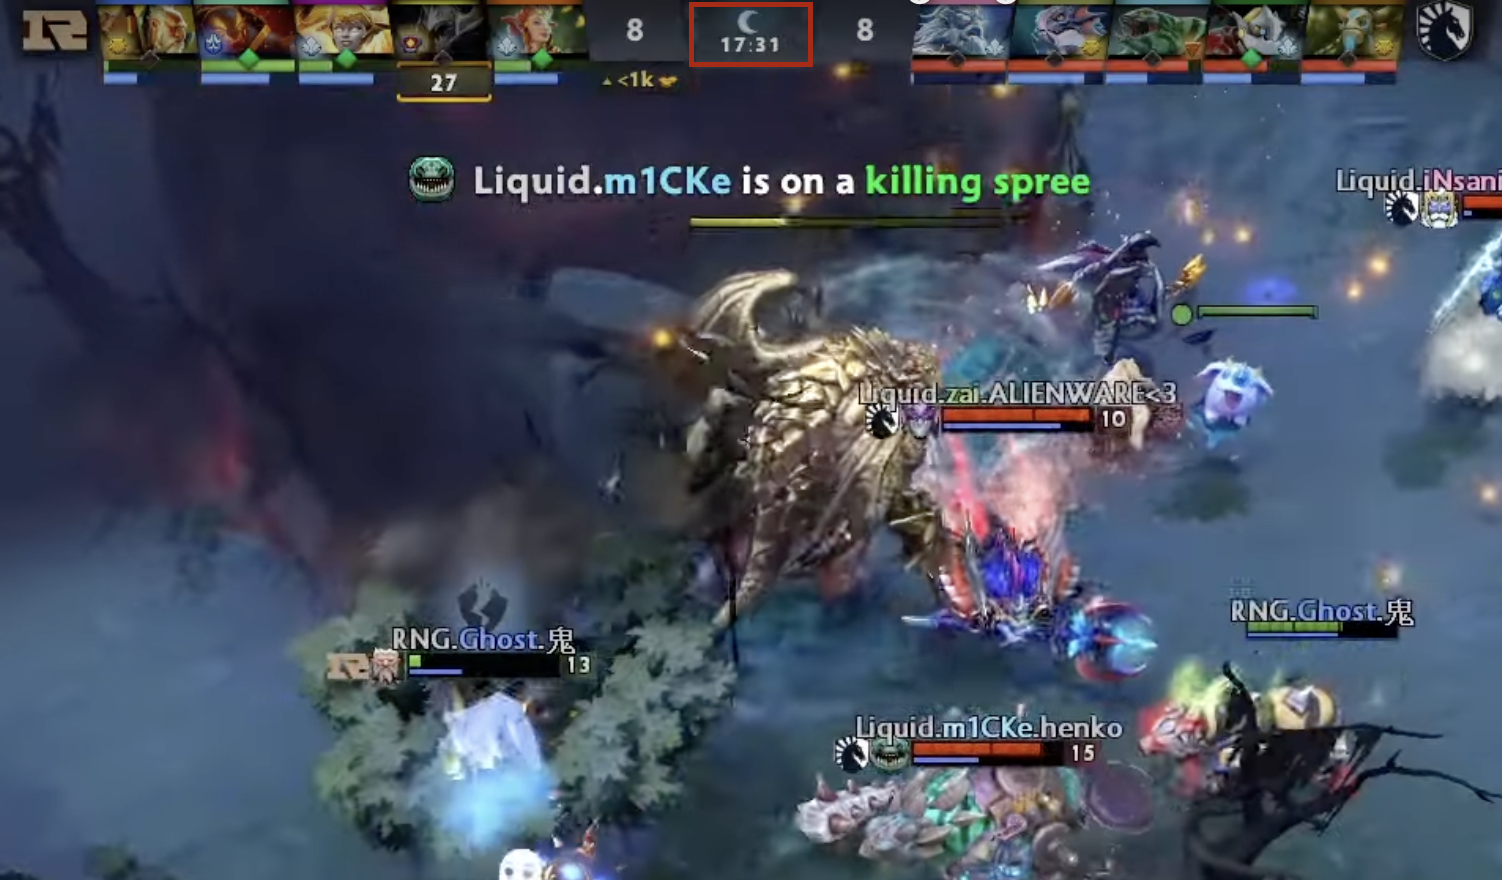 The clock in the interface of the Dota 2 game is framed by a red frame